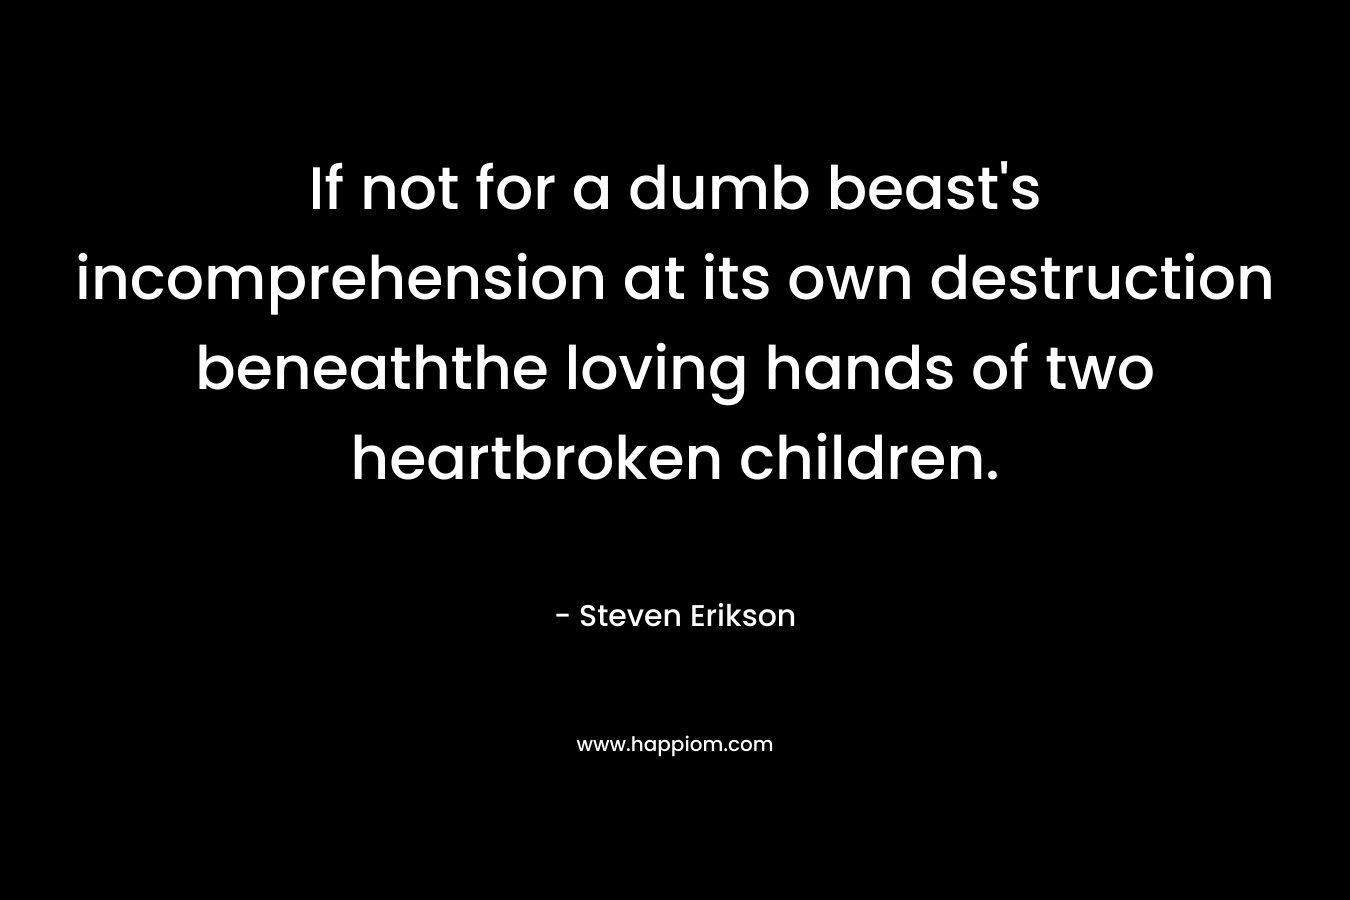 If not for a dumb beast's incomprehension at its own destruction beneaththe loving hands of two heartbroken children.